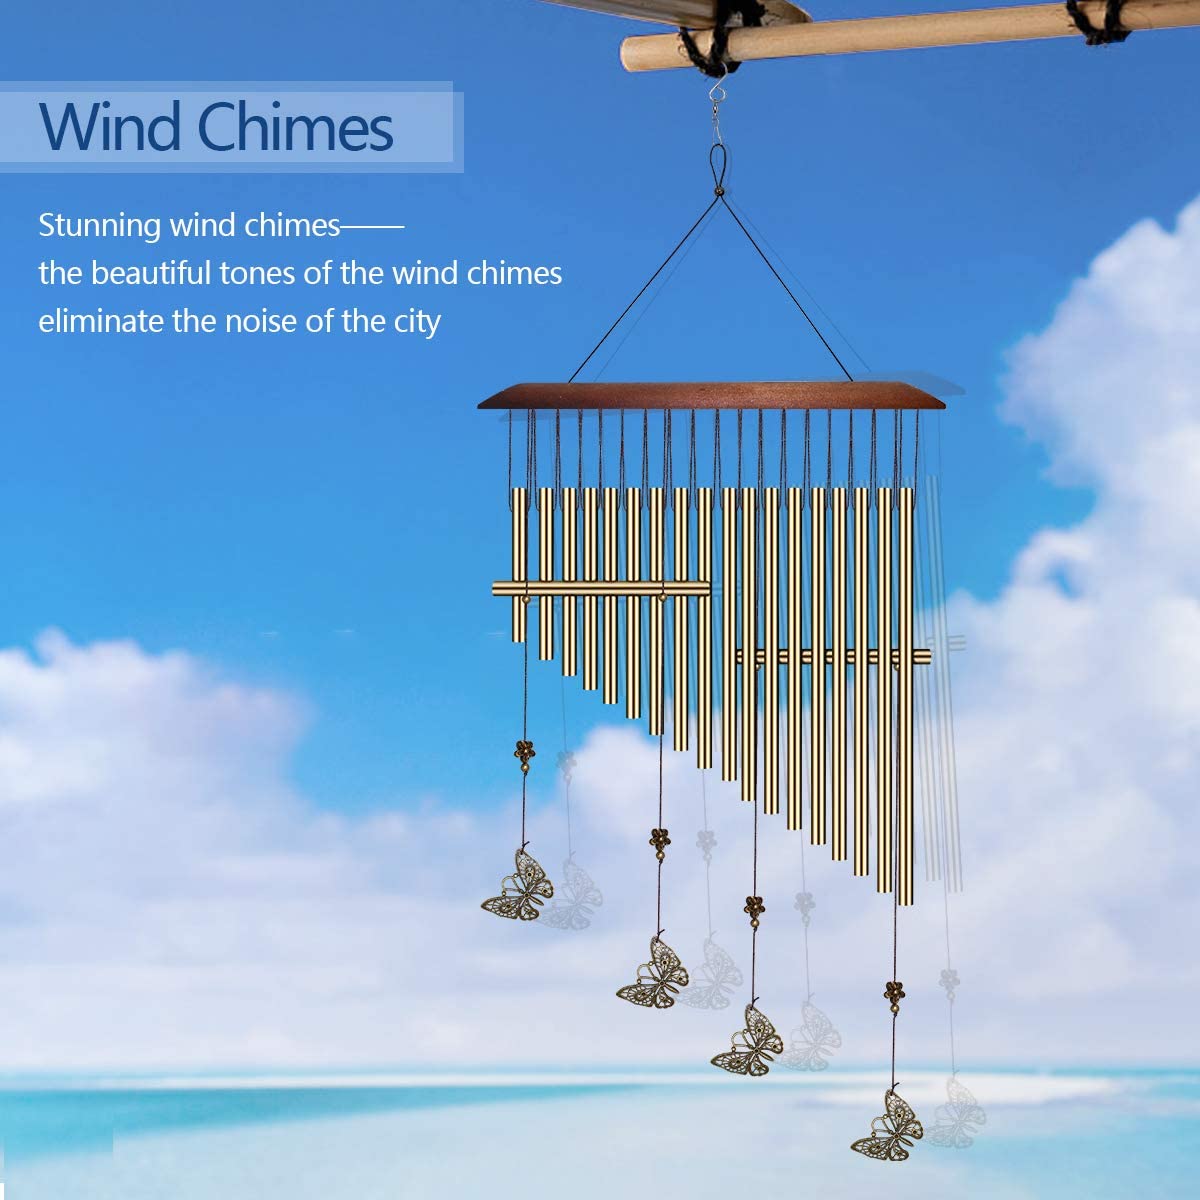 Outdoor-Wind-Chimes-Melodic-Tones-Butterfly-Harp-Wind-Chimes-Handmade-Wood-for-Home-Garden-Patio-Dec-1801315-1